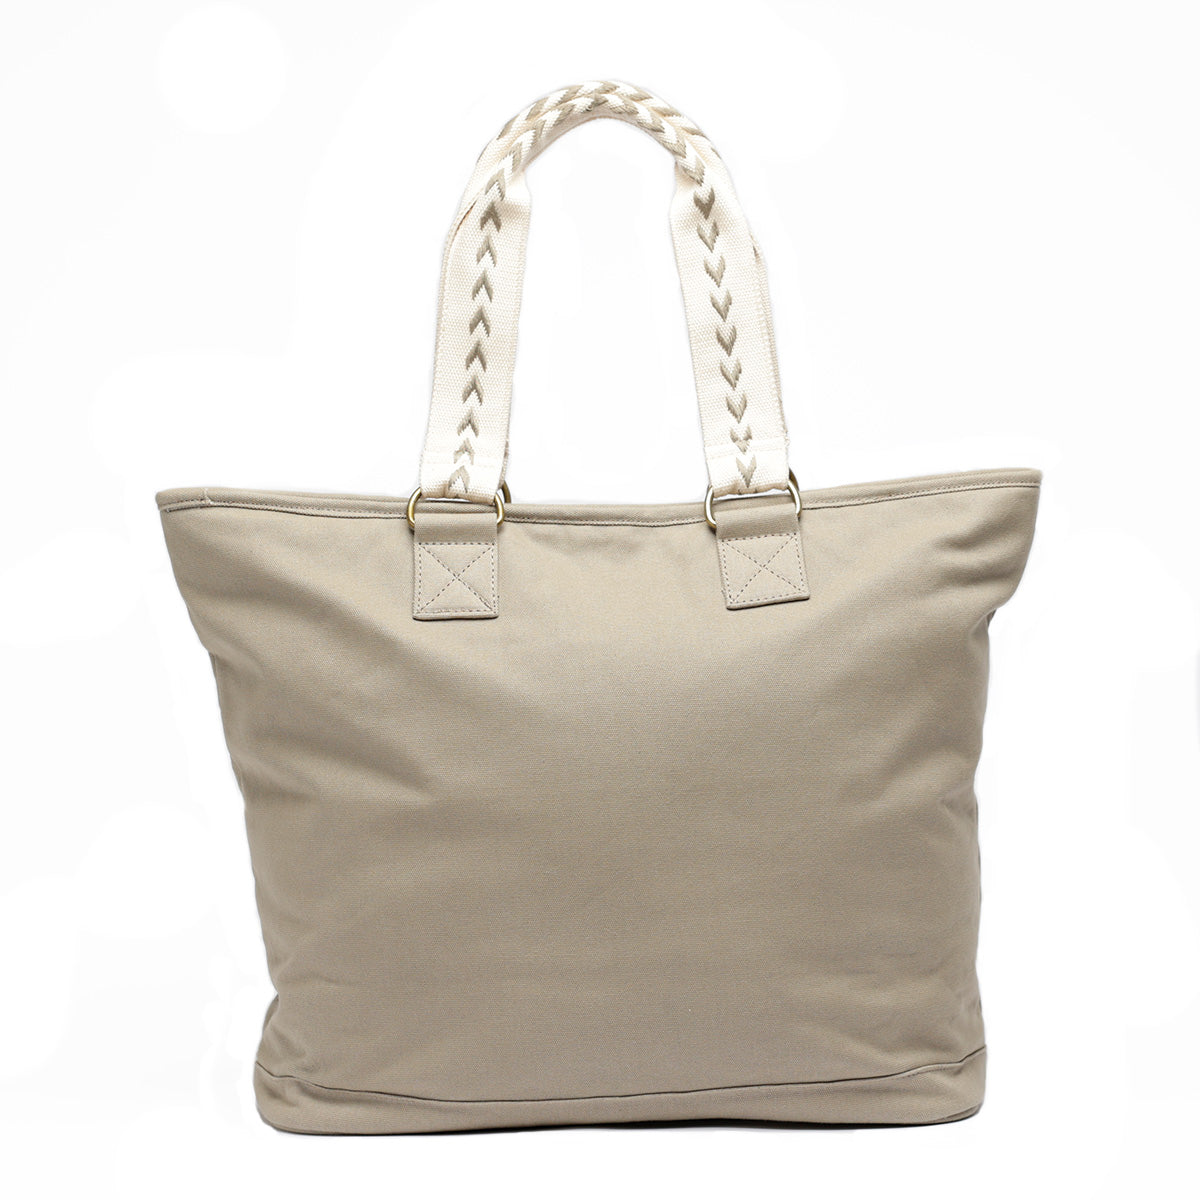 Back side of Rye (Tan) large capacity tote with off-white handles that have a tan accent stitch design on them.